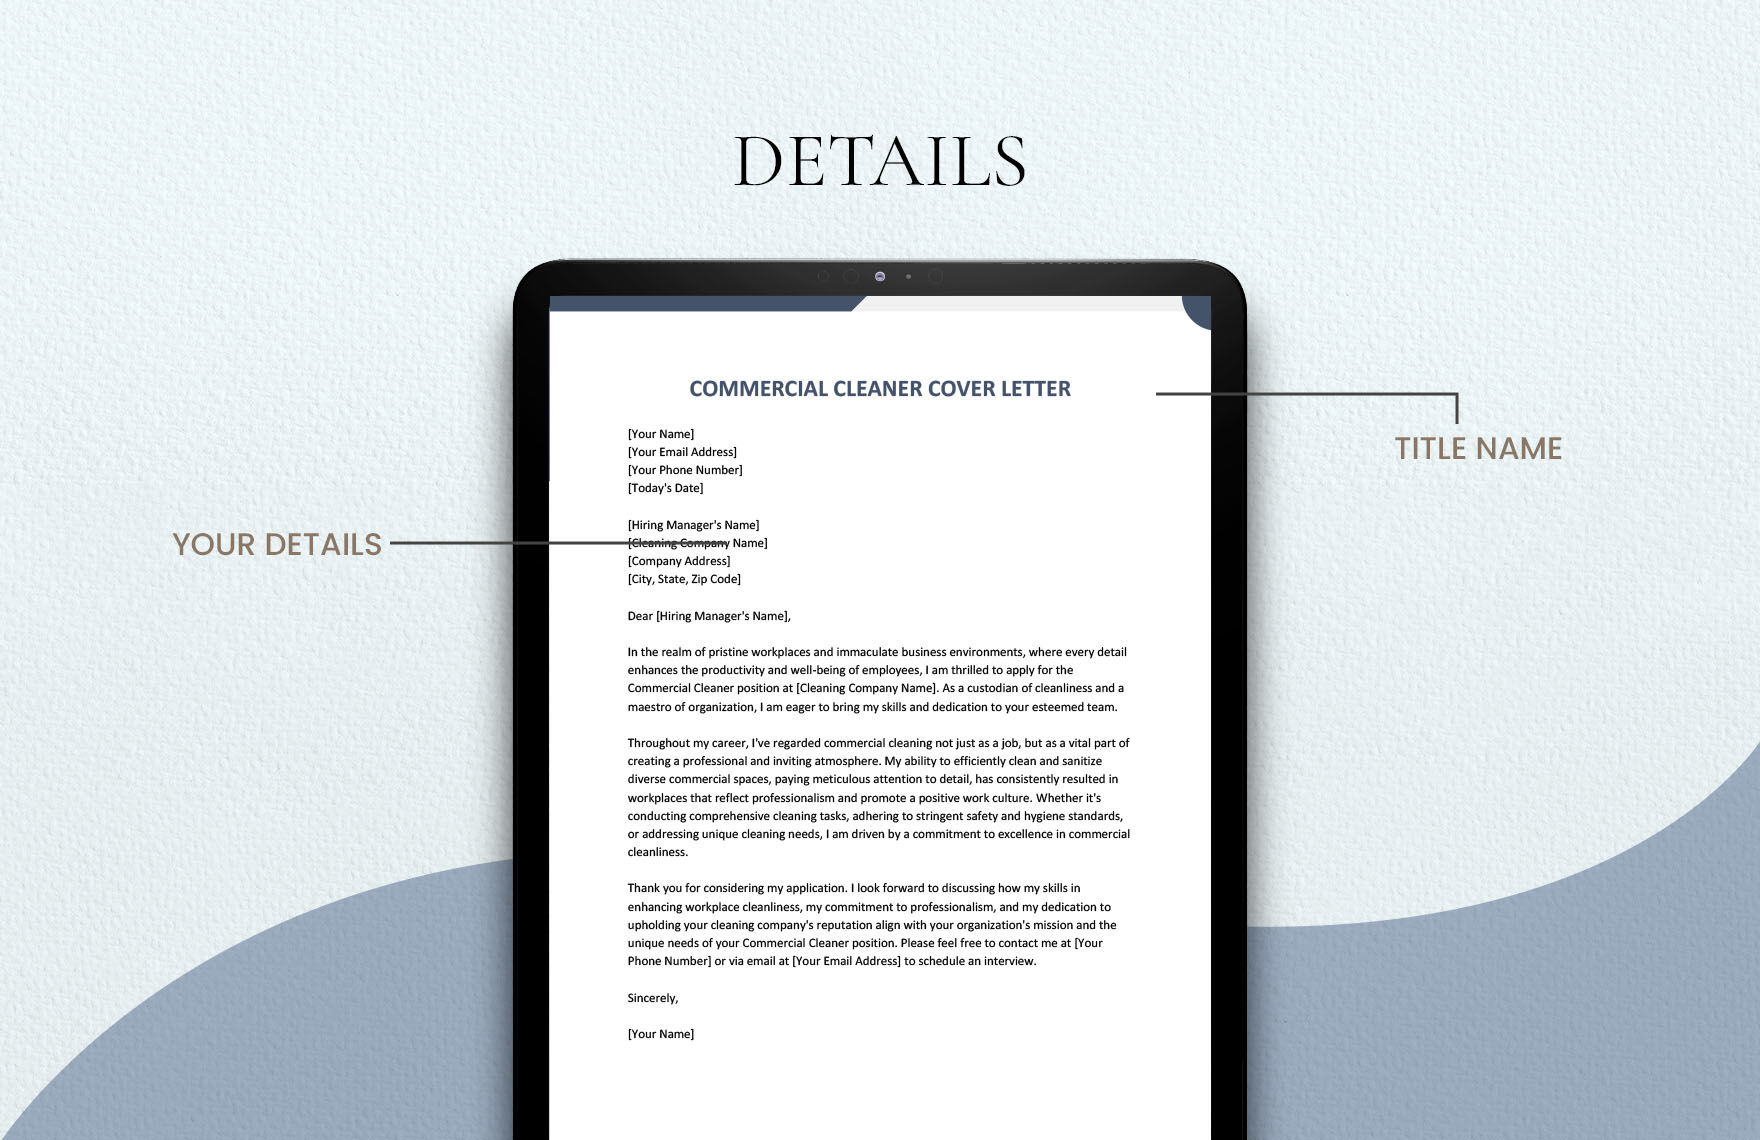 Commercial Cleaner Cover Letter